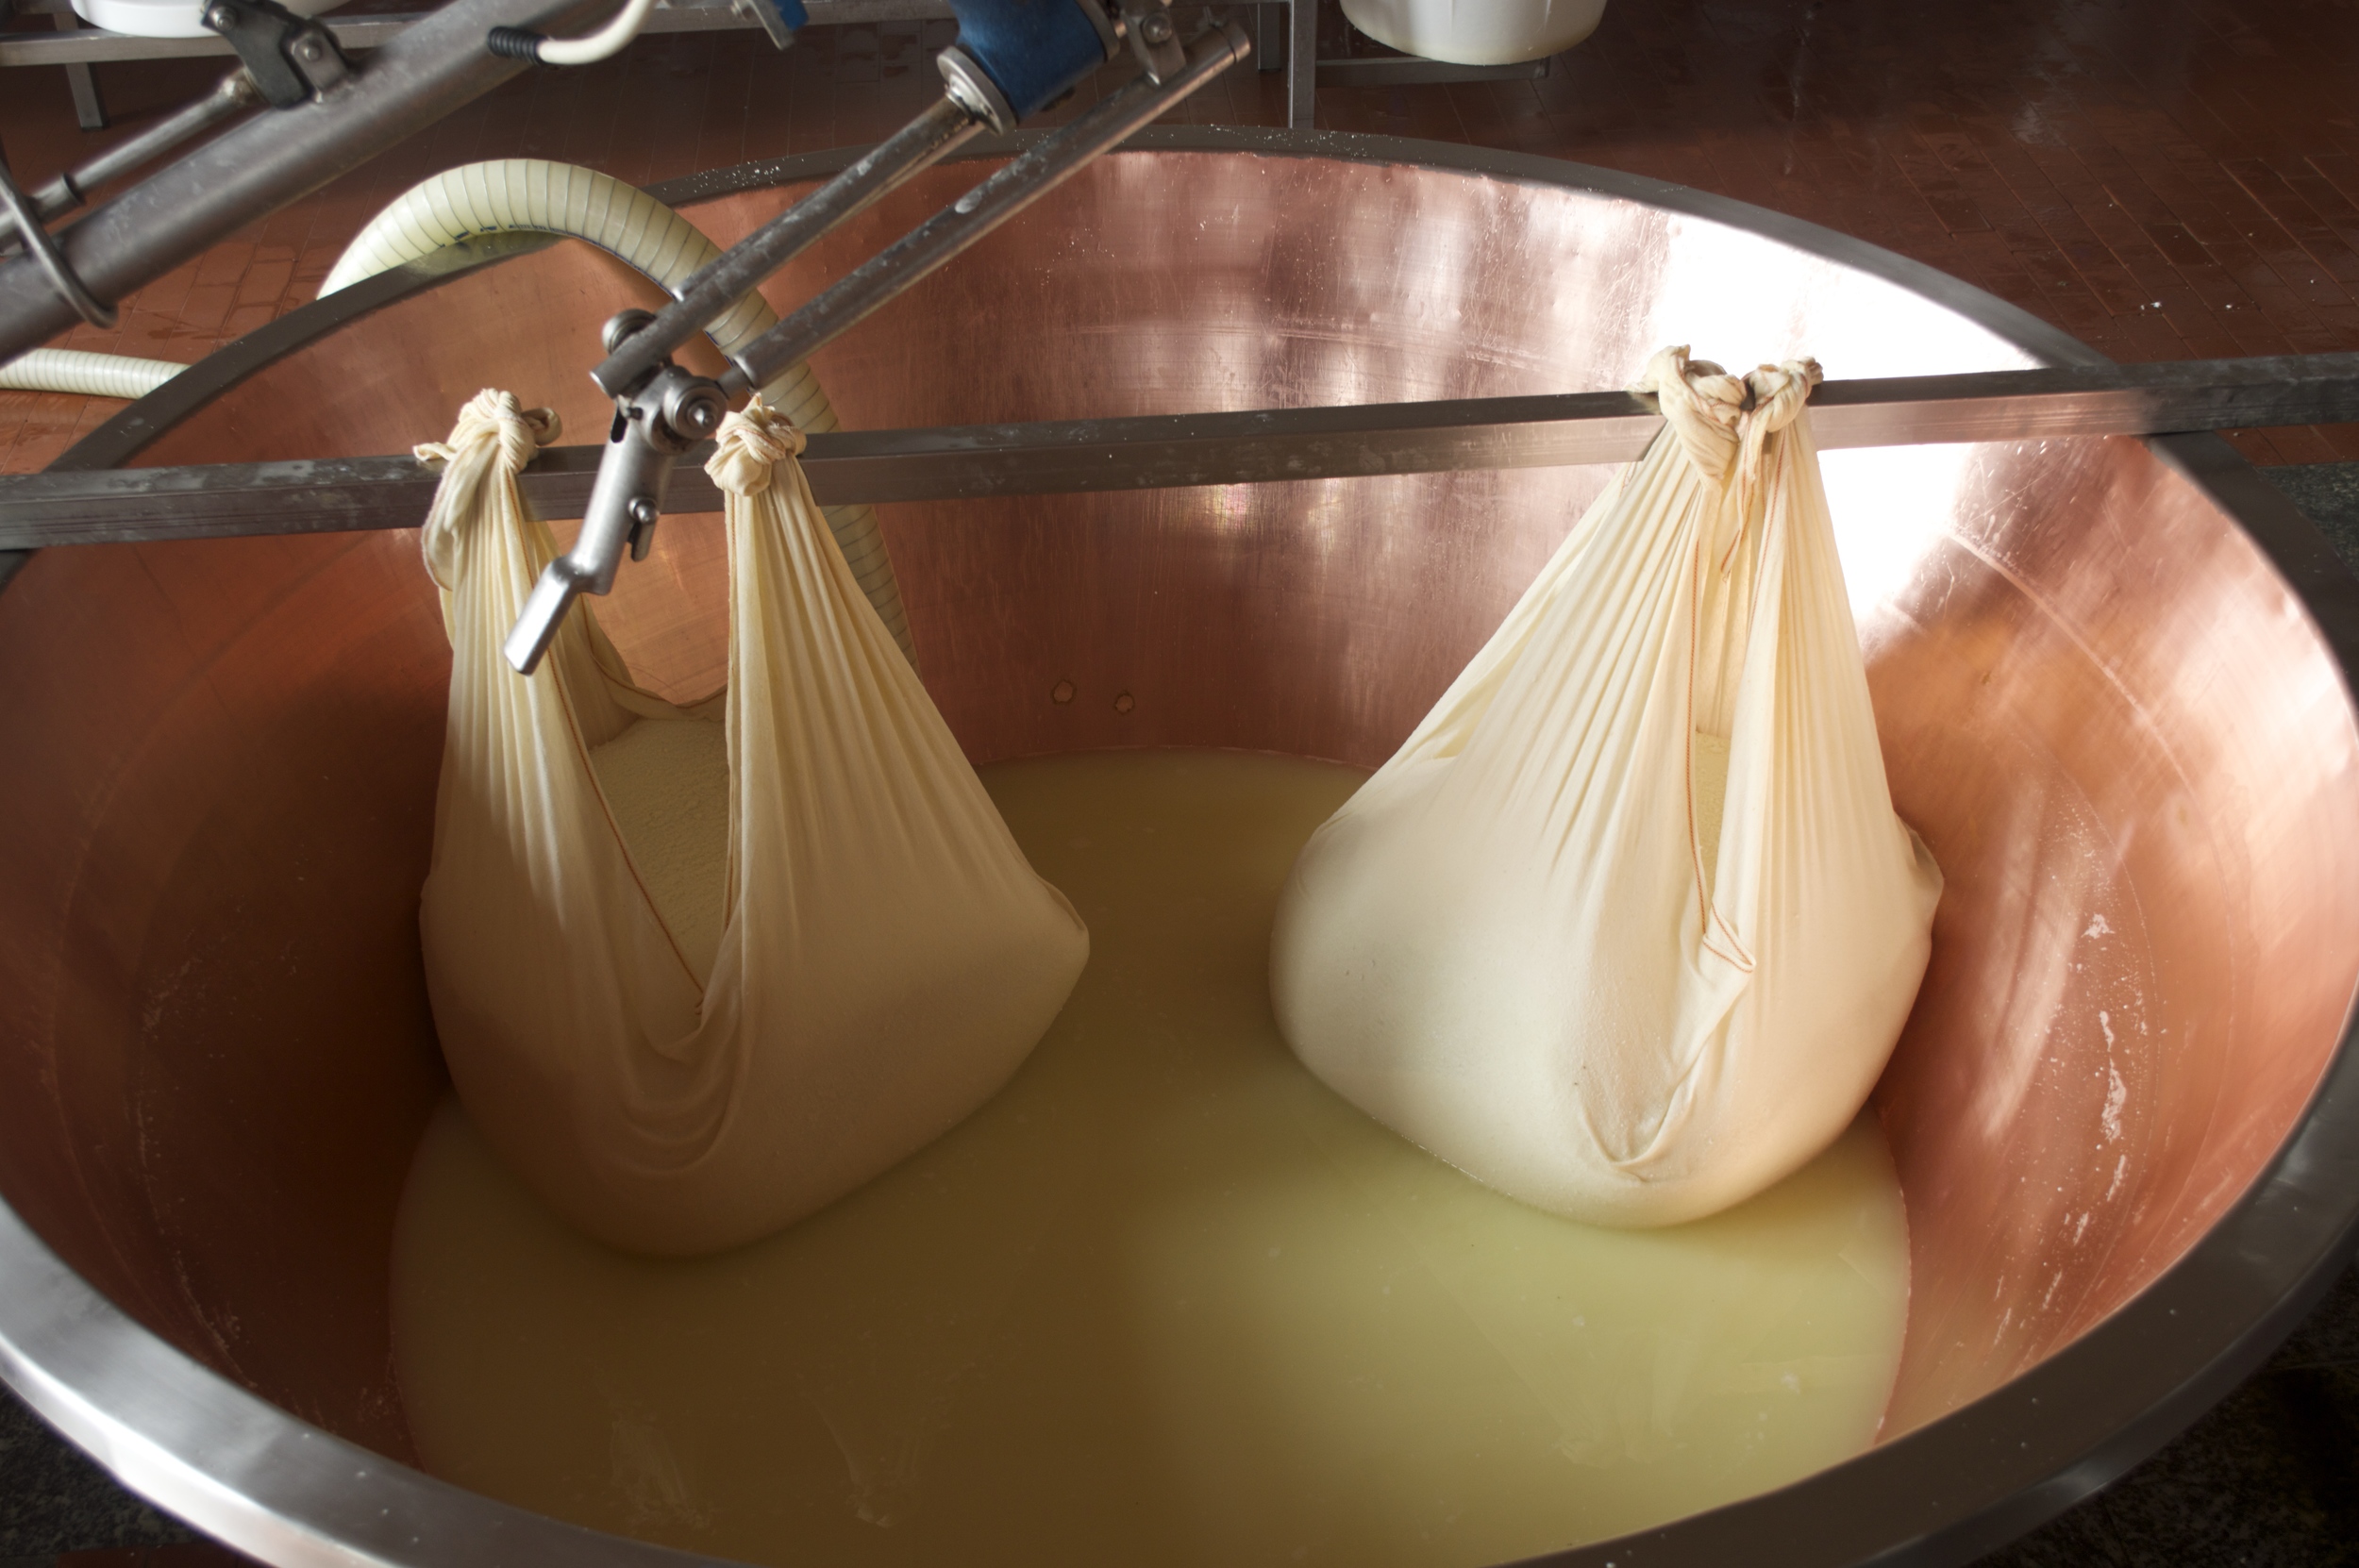 a cheese is born!